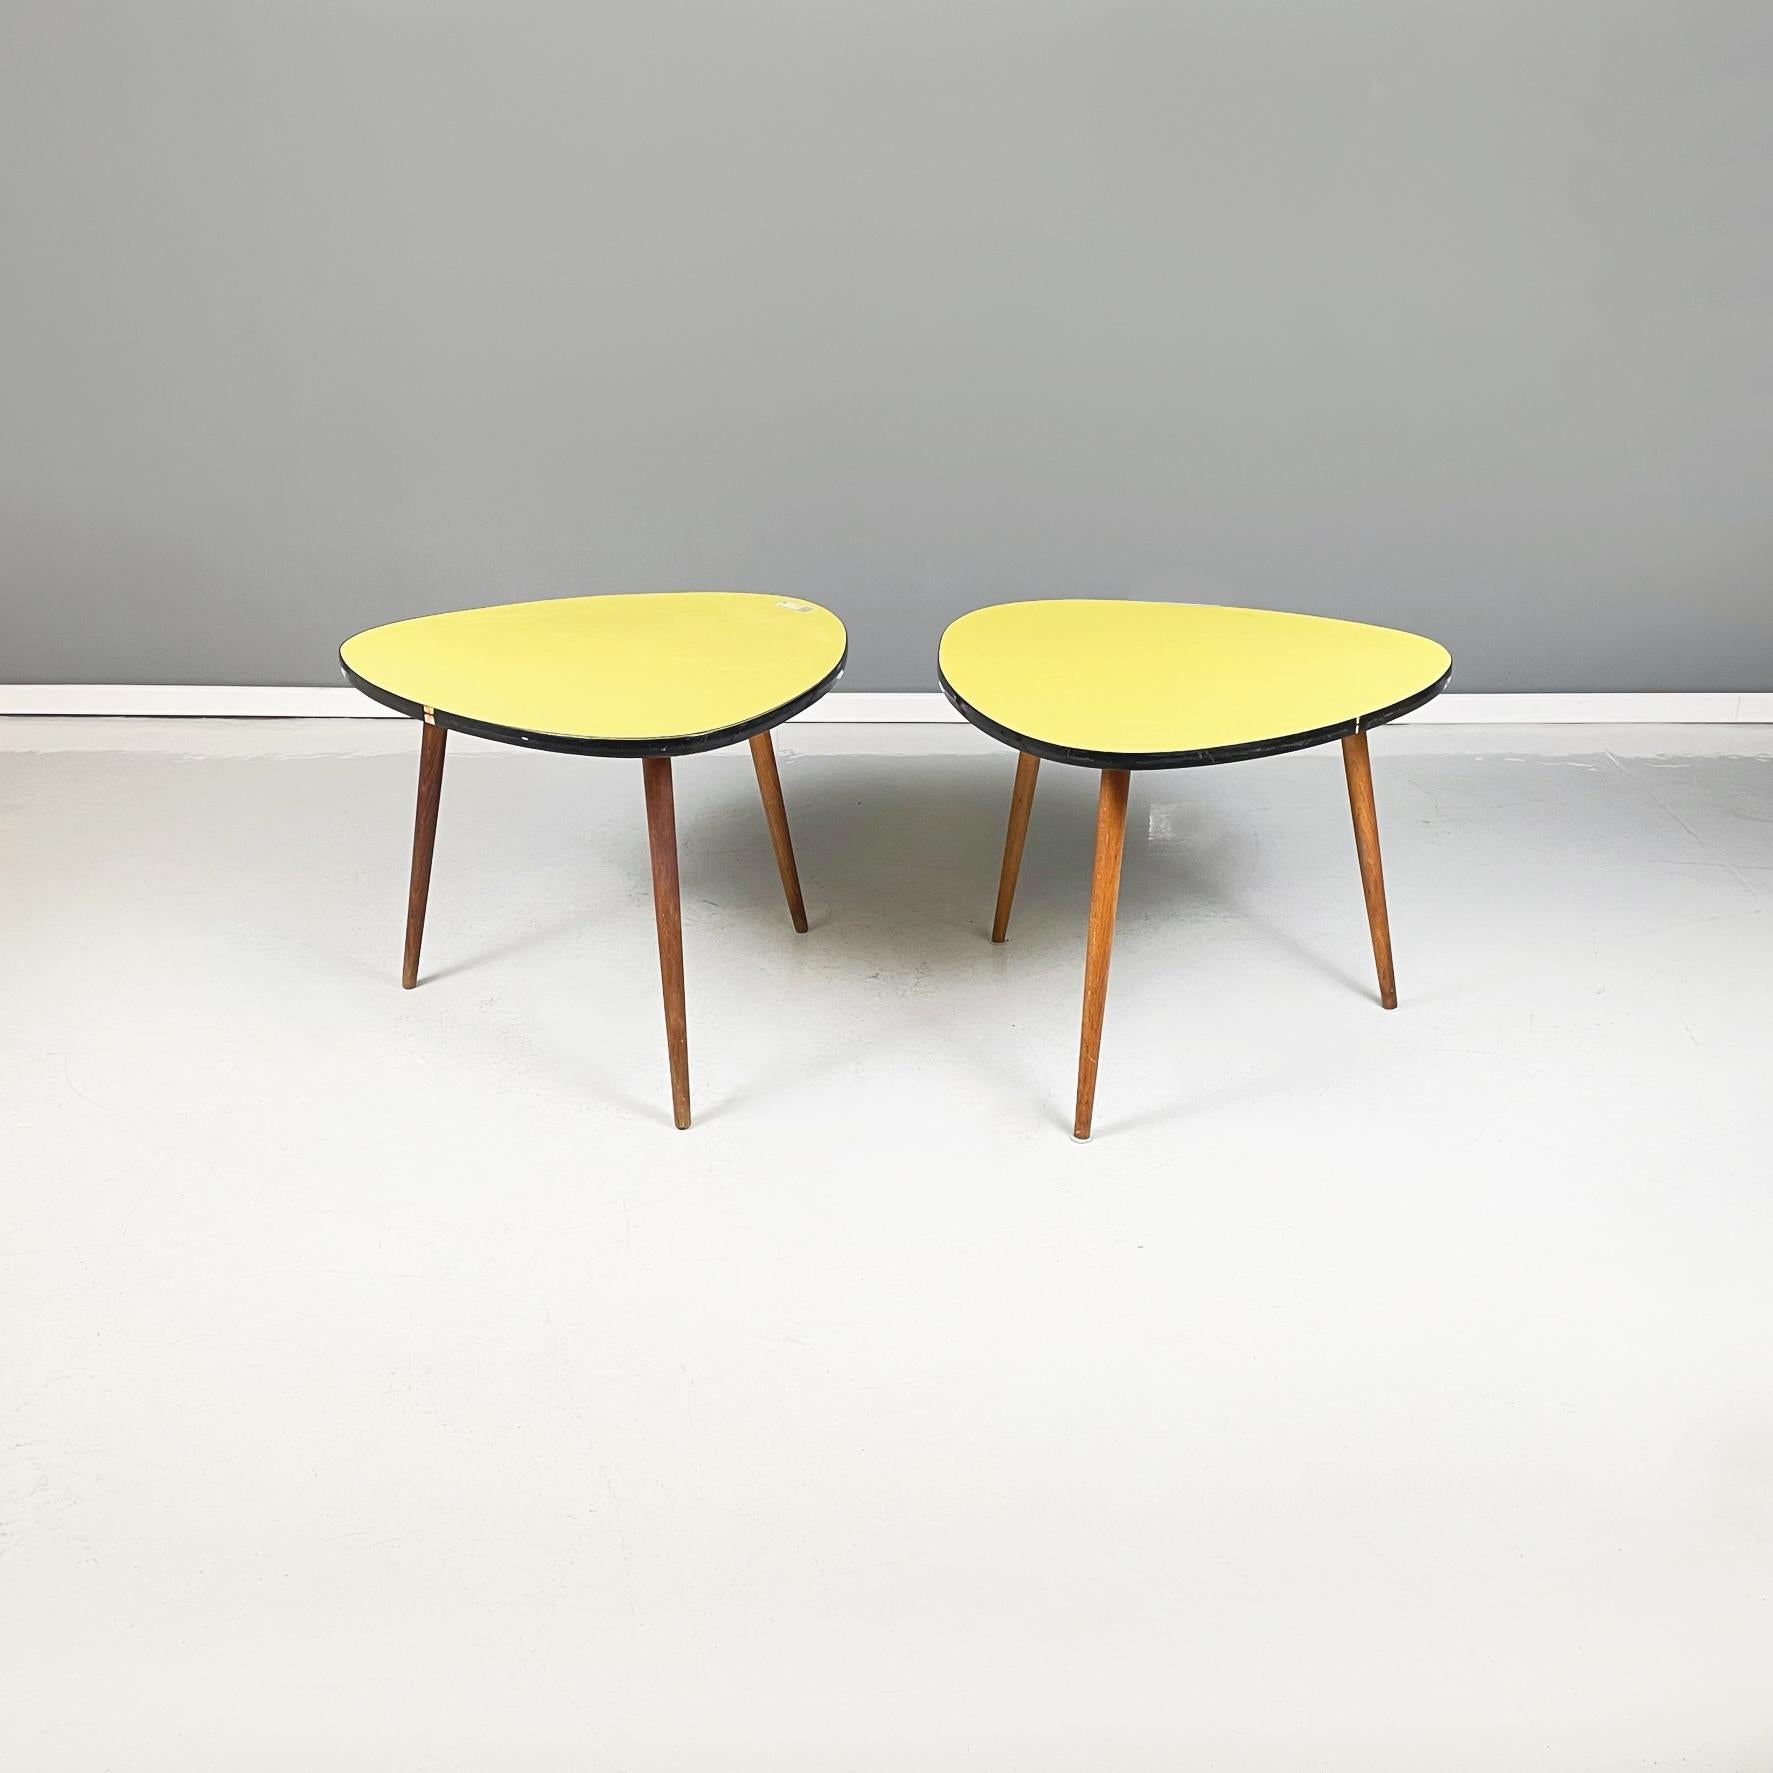 Northern European mid-century wood, yellow and black formica coffee tables, 1960s
Pair of coffee tables with triangular top with rounded corners, in yellow formica and black profile. The legs of the table have a round section in solid beech